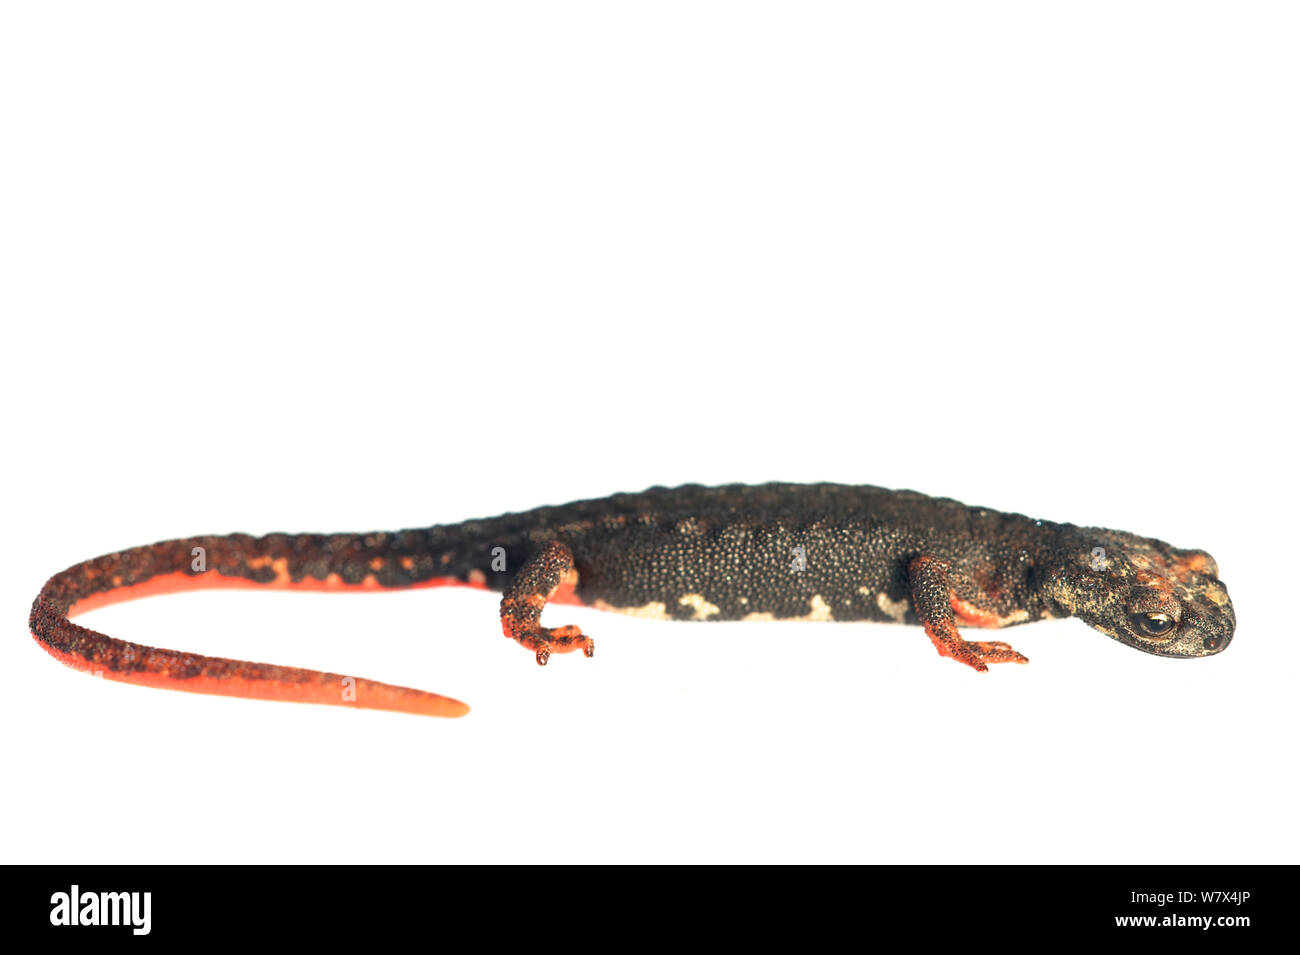 Northern spectacled salamander (Salamandrina perspicillata) against white background, Italy, April. Controlled conditions. Stock Photo